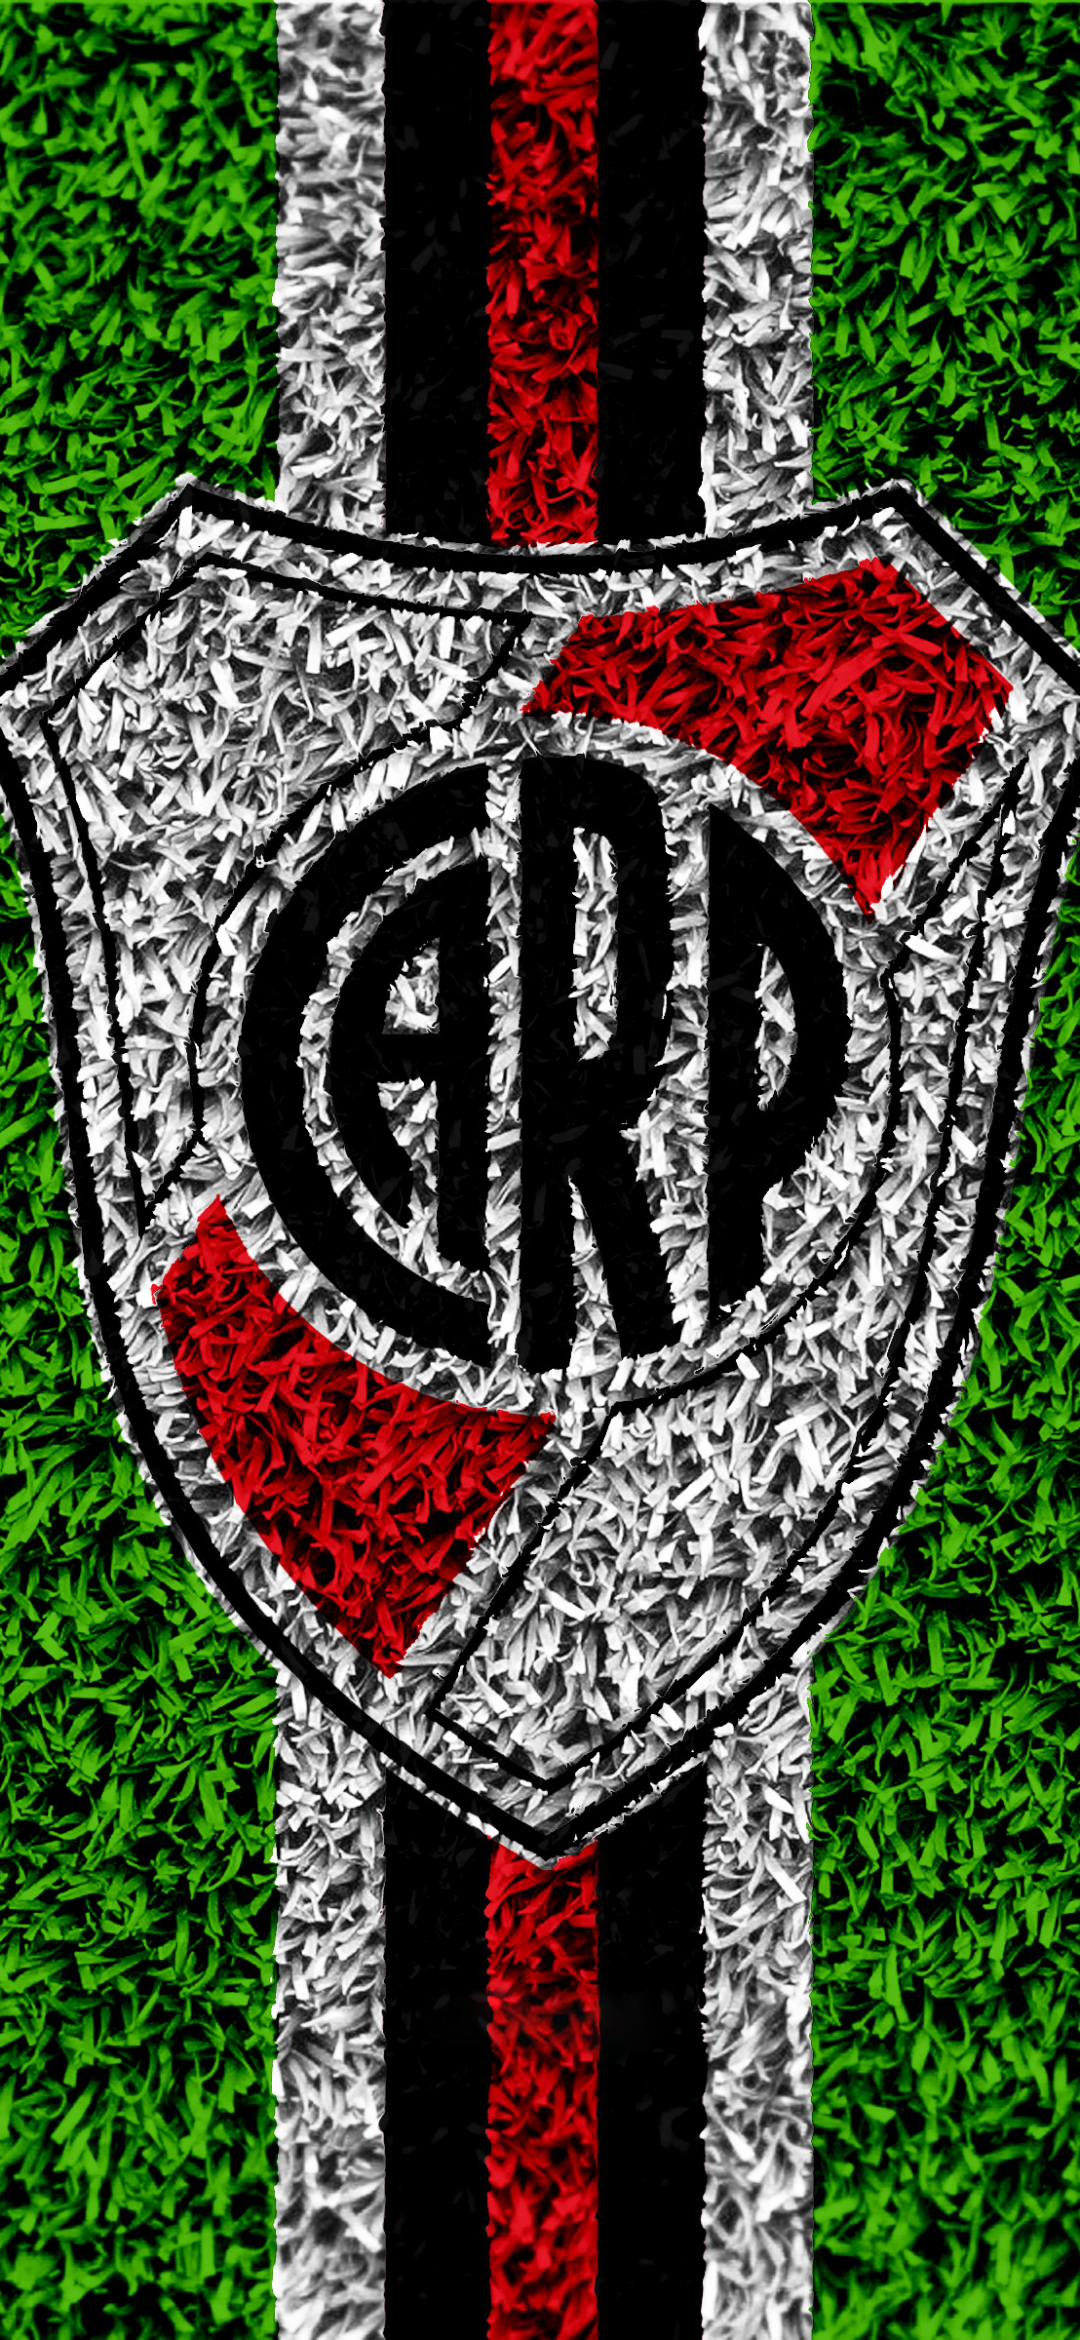 20+] Club Atlético River Plate Wallpapers